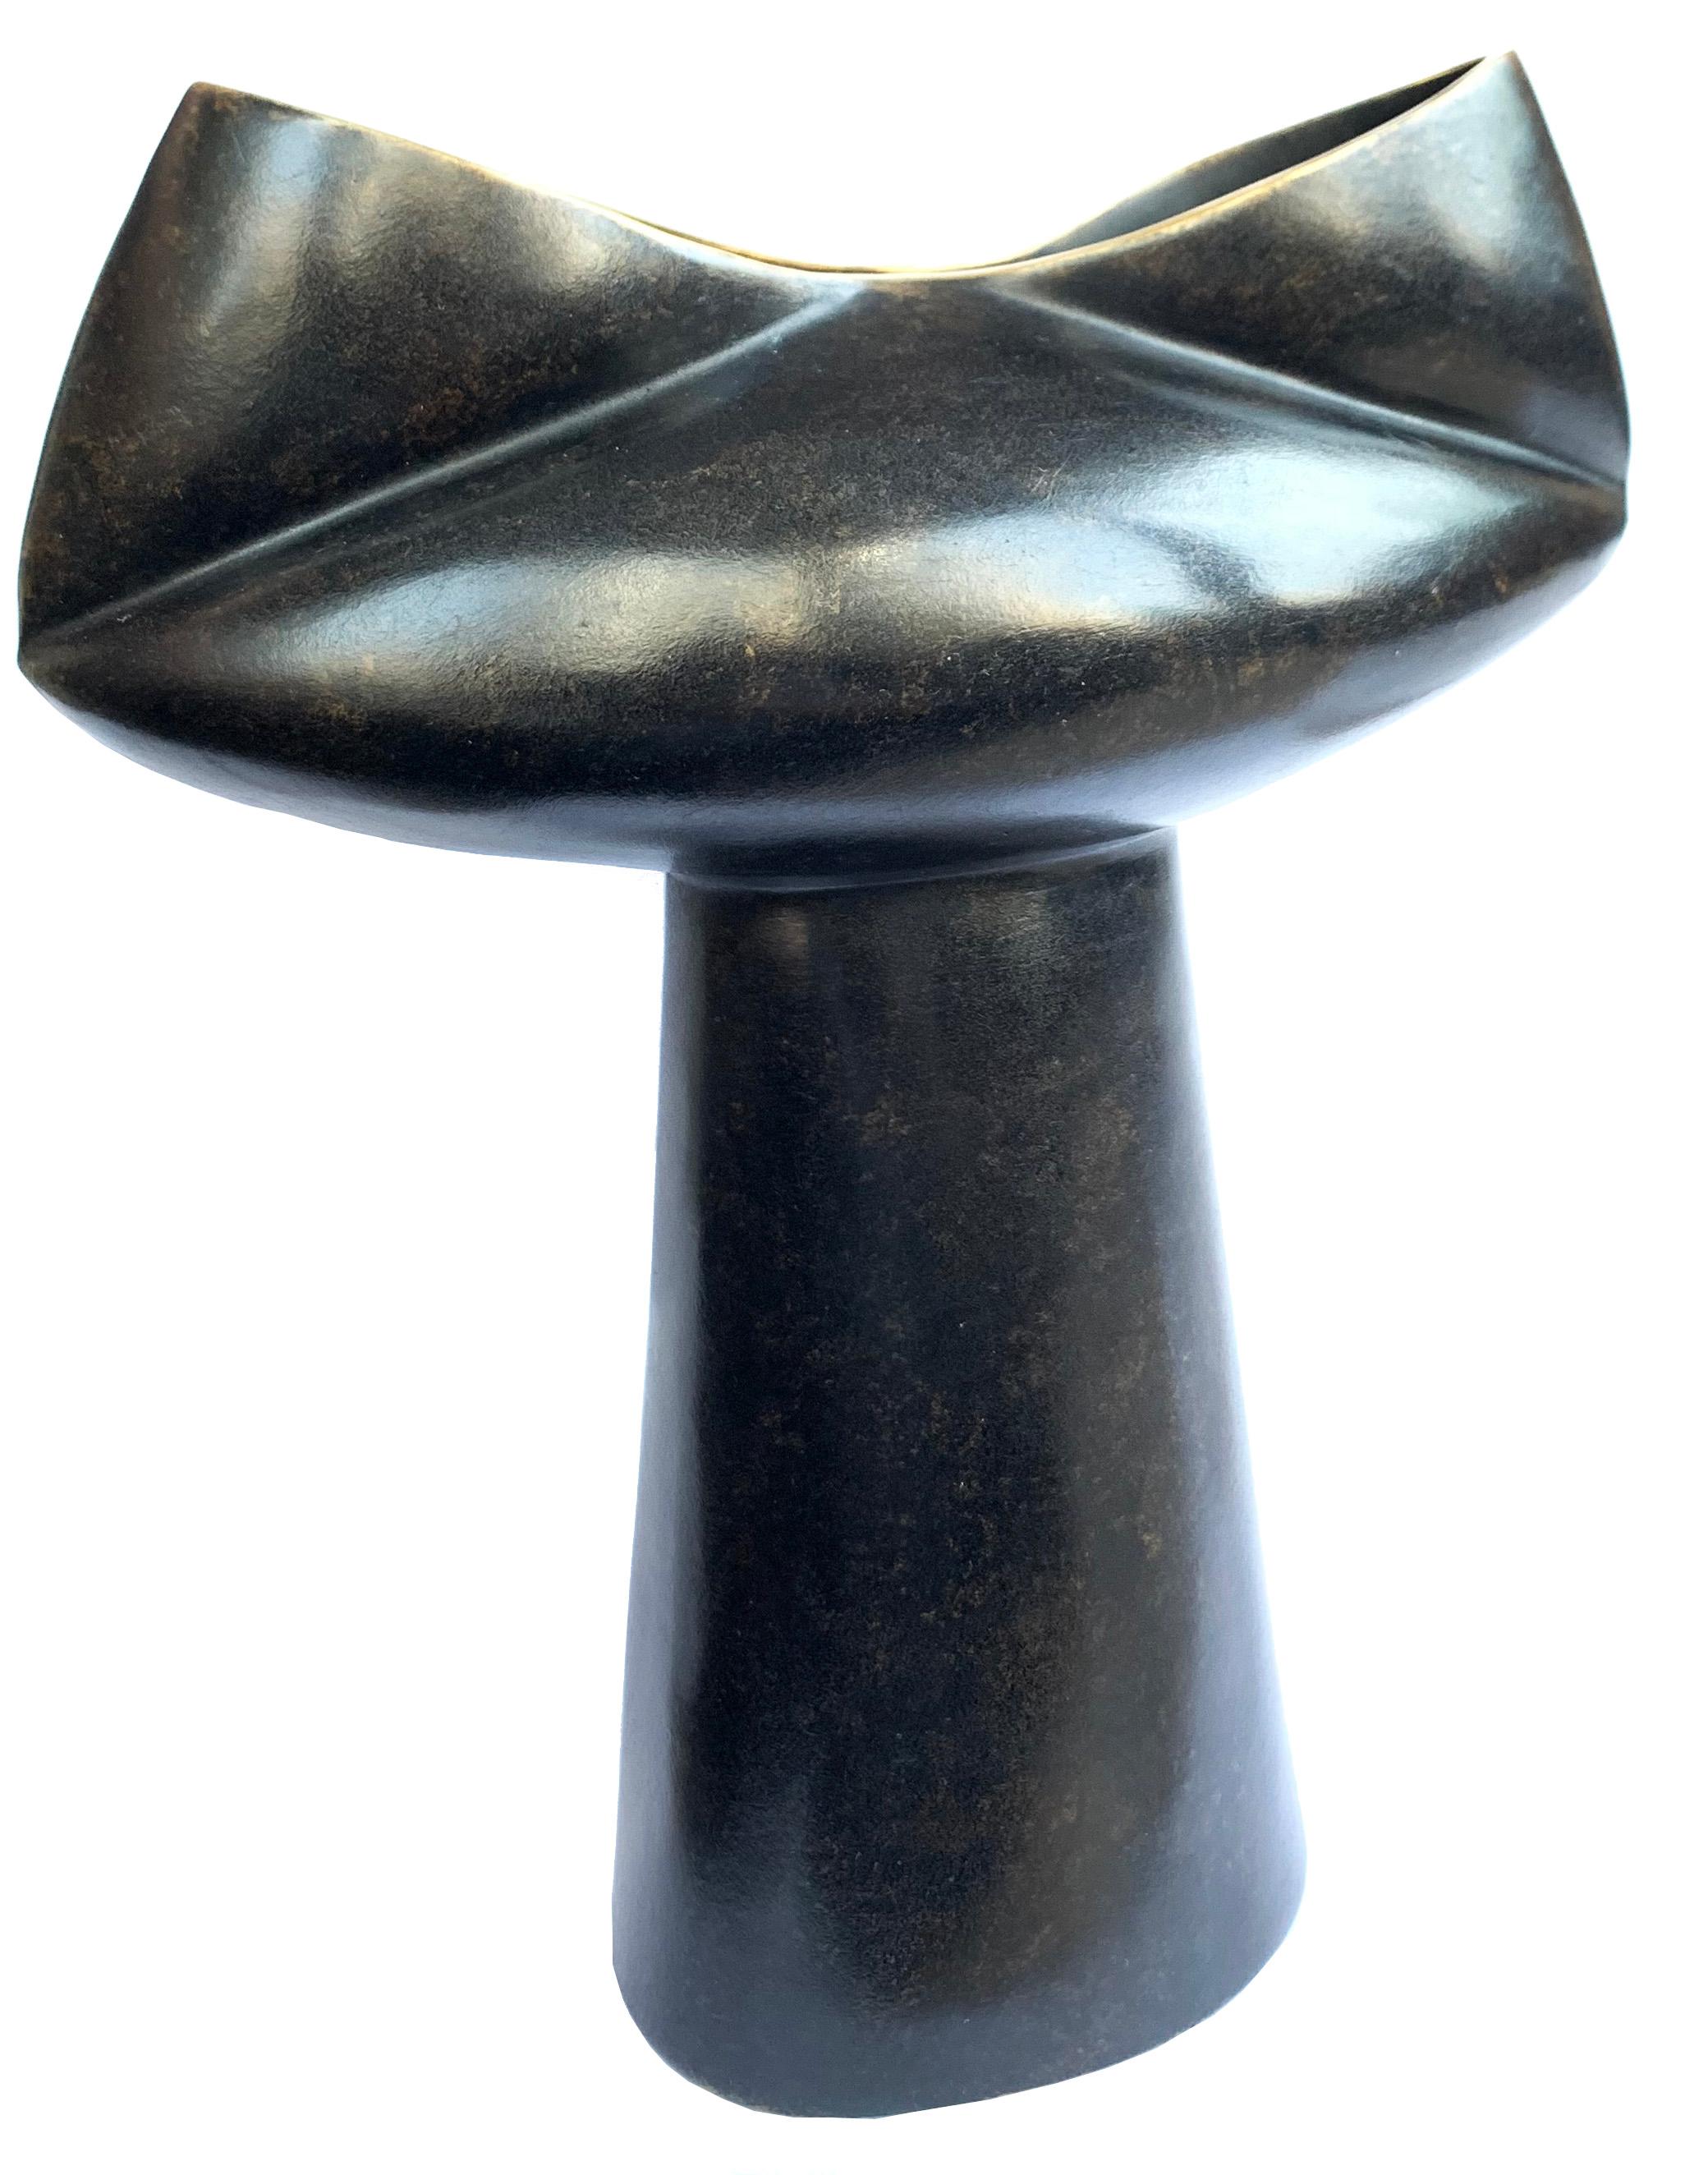 Thai Bronze Vase The Cocoon Mid Century Rhythm André Fu Living Decorative New Metal For Sale